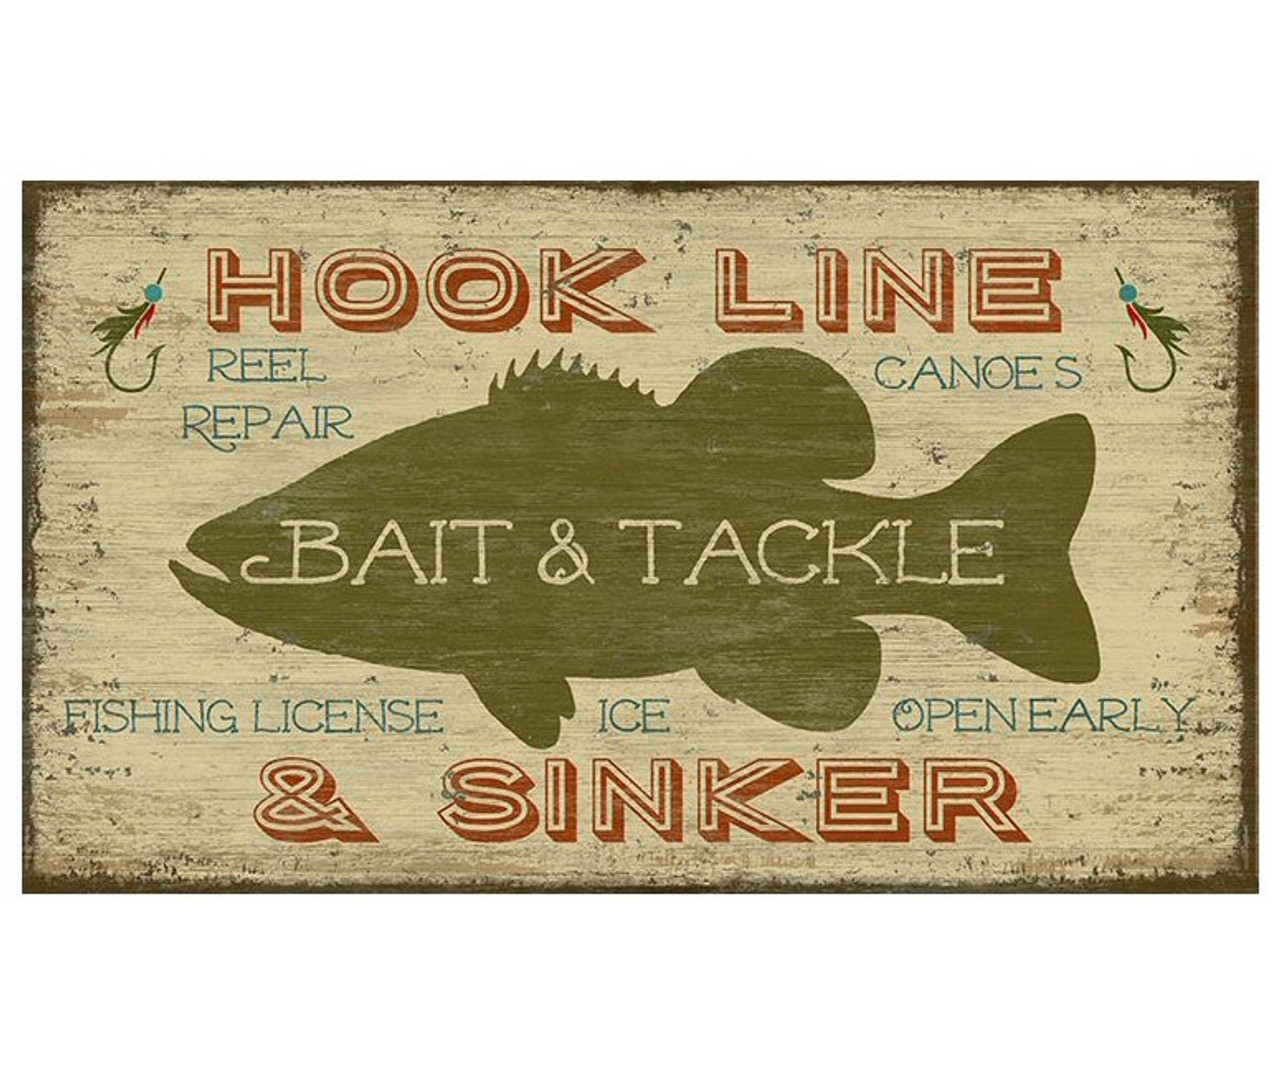 https://cdn11.bigcommerce.com/s-oo0gdojvjo/images/stencil/1280x1280/products/30705/40555/sn-610-custom-bait-tackle-with-bass-vintage-style-wooden-sign-red-horse-signs__05963.1538041427.jpg?c=2